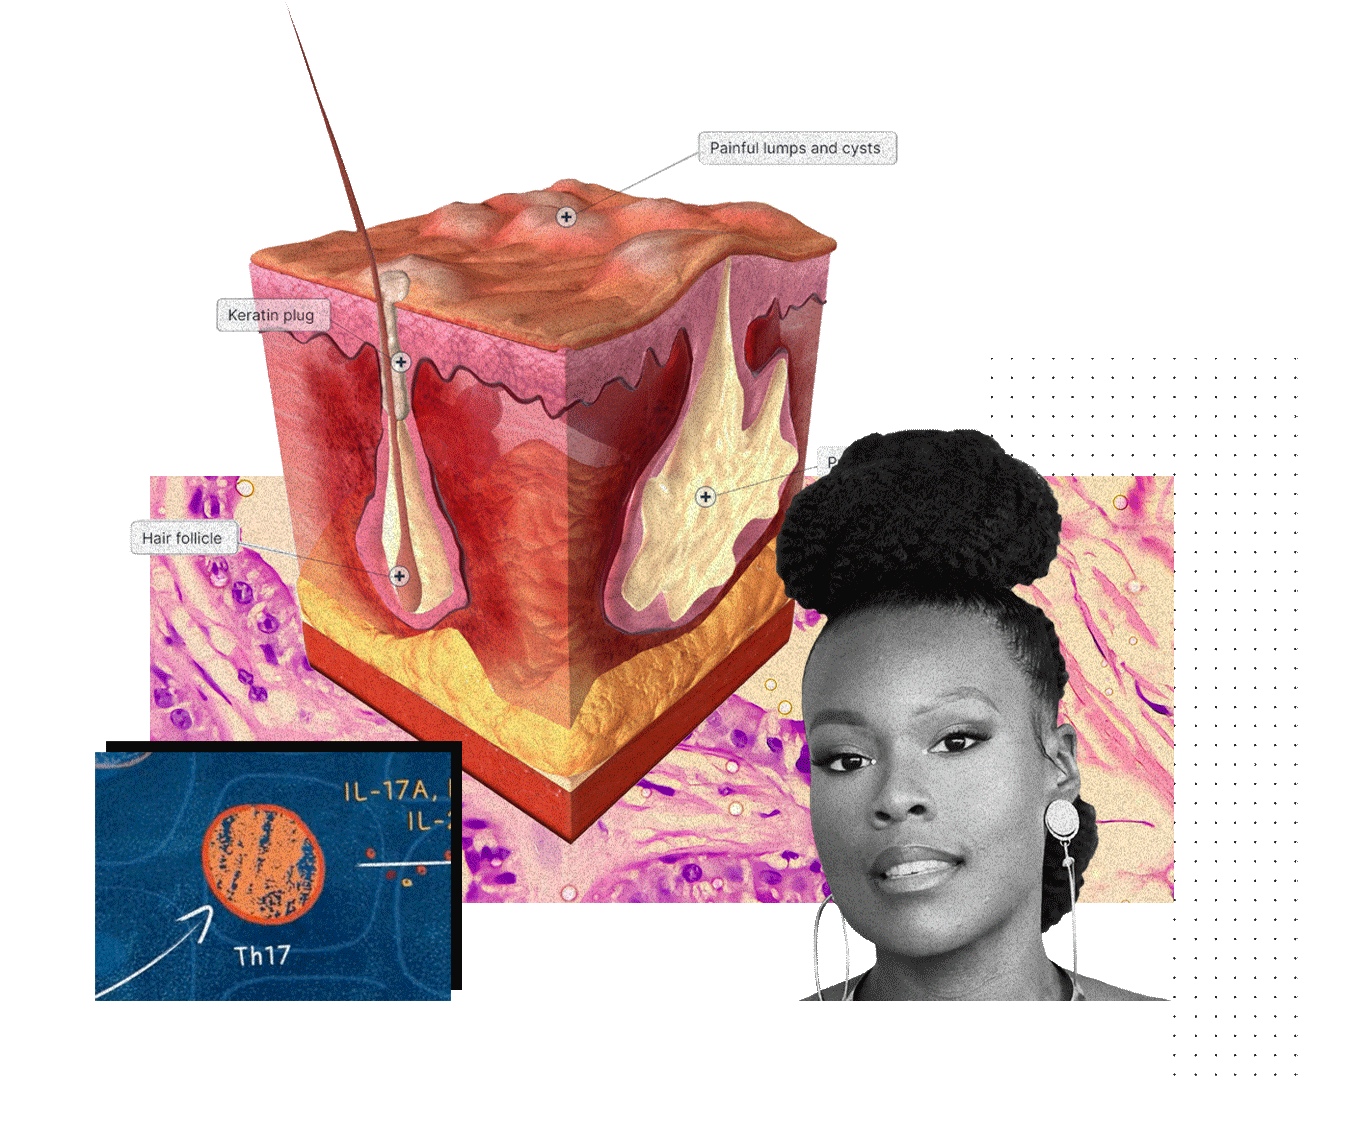 Skin microscopy and 3D illustration of skin layers with follicular inflammation, behind a black woman and a screen depicting Th17.